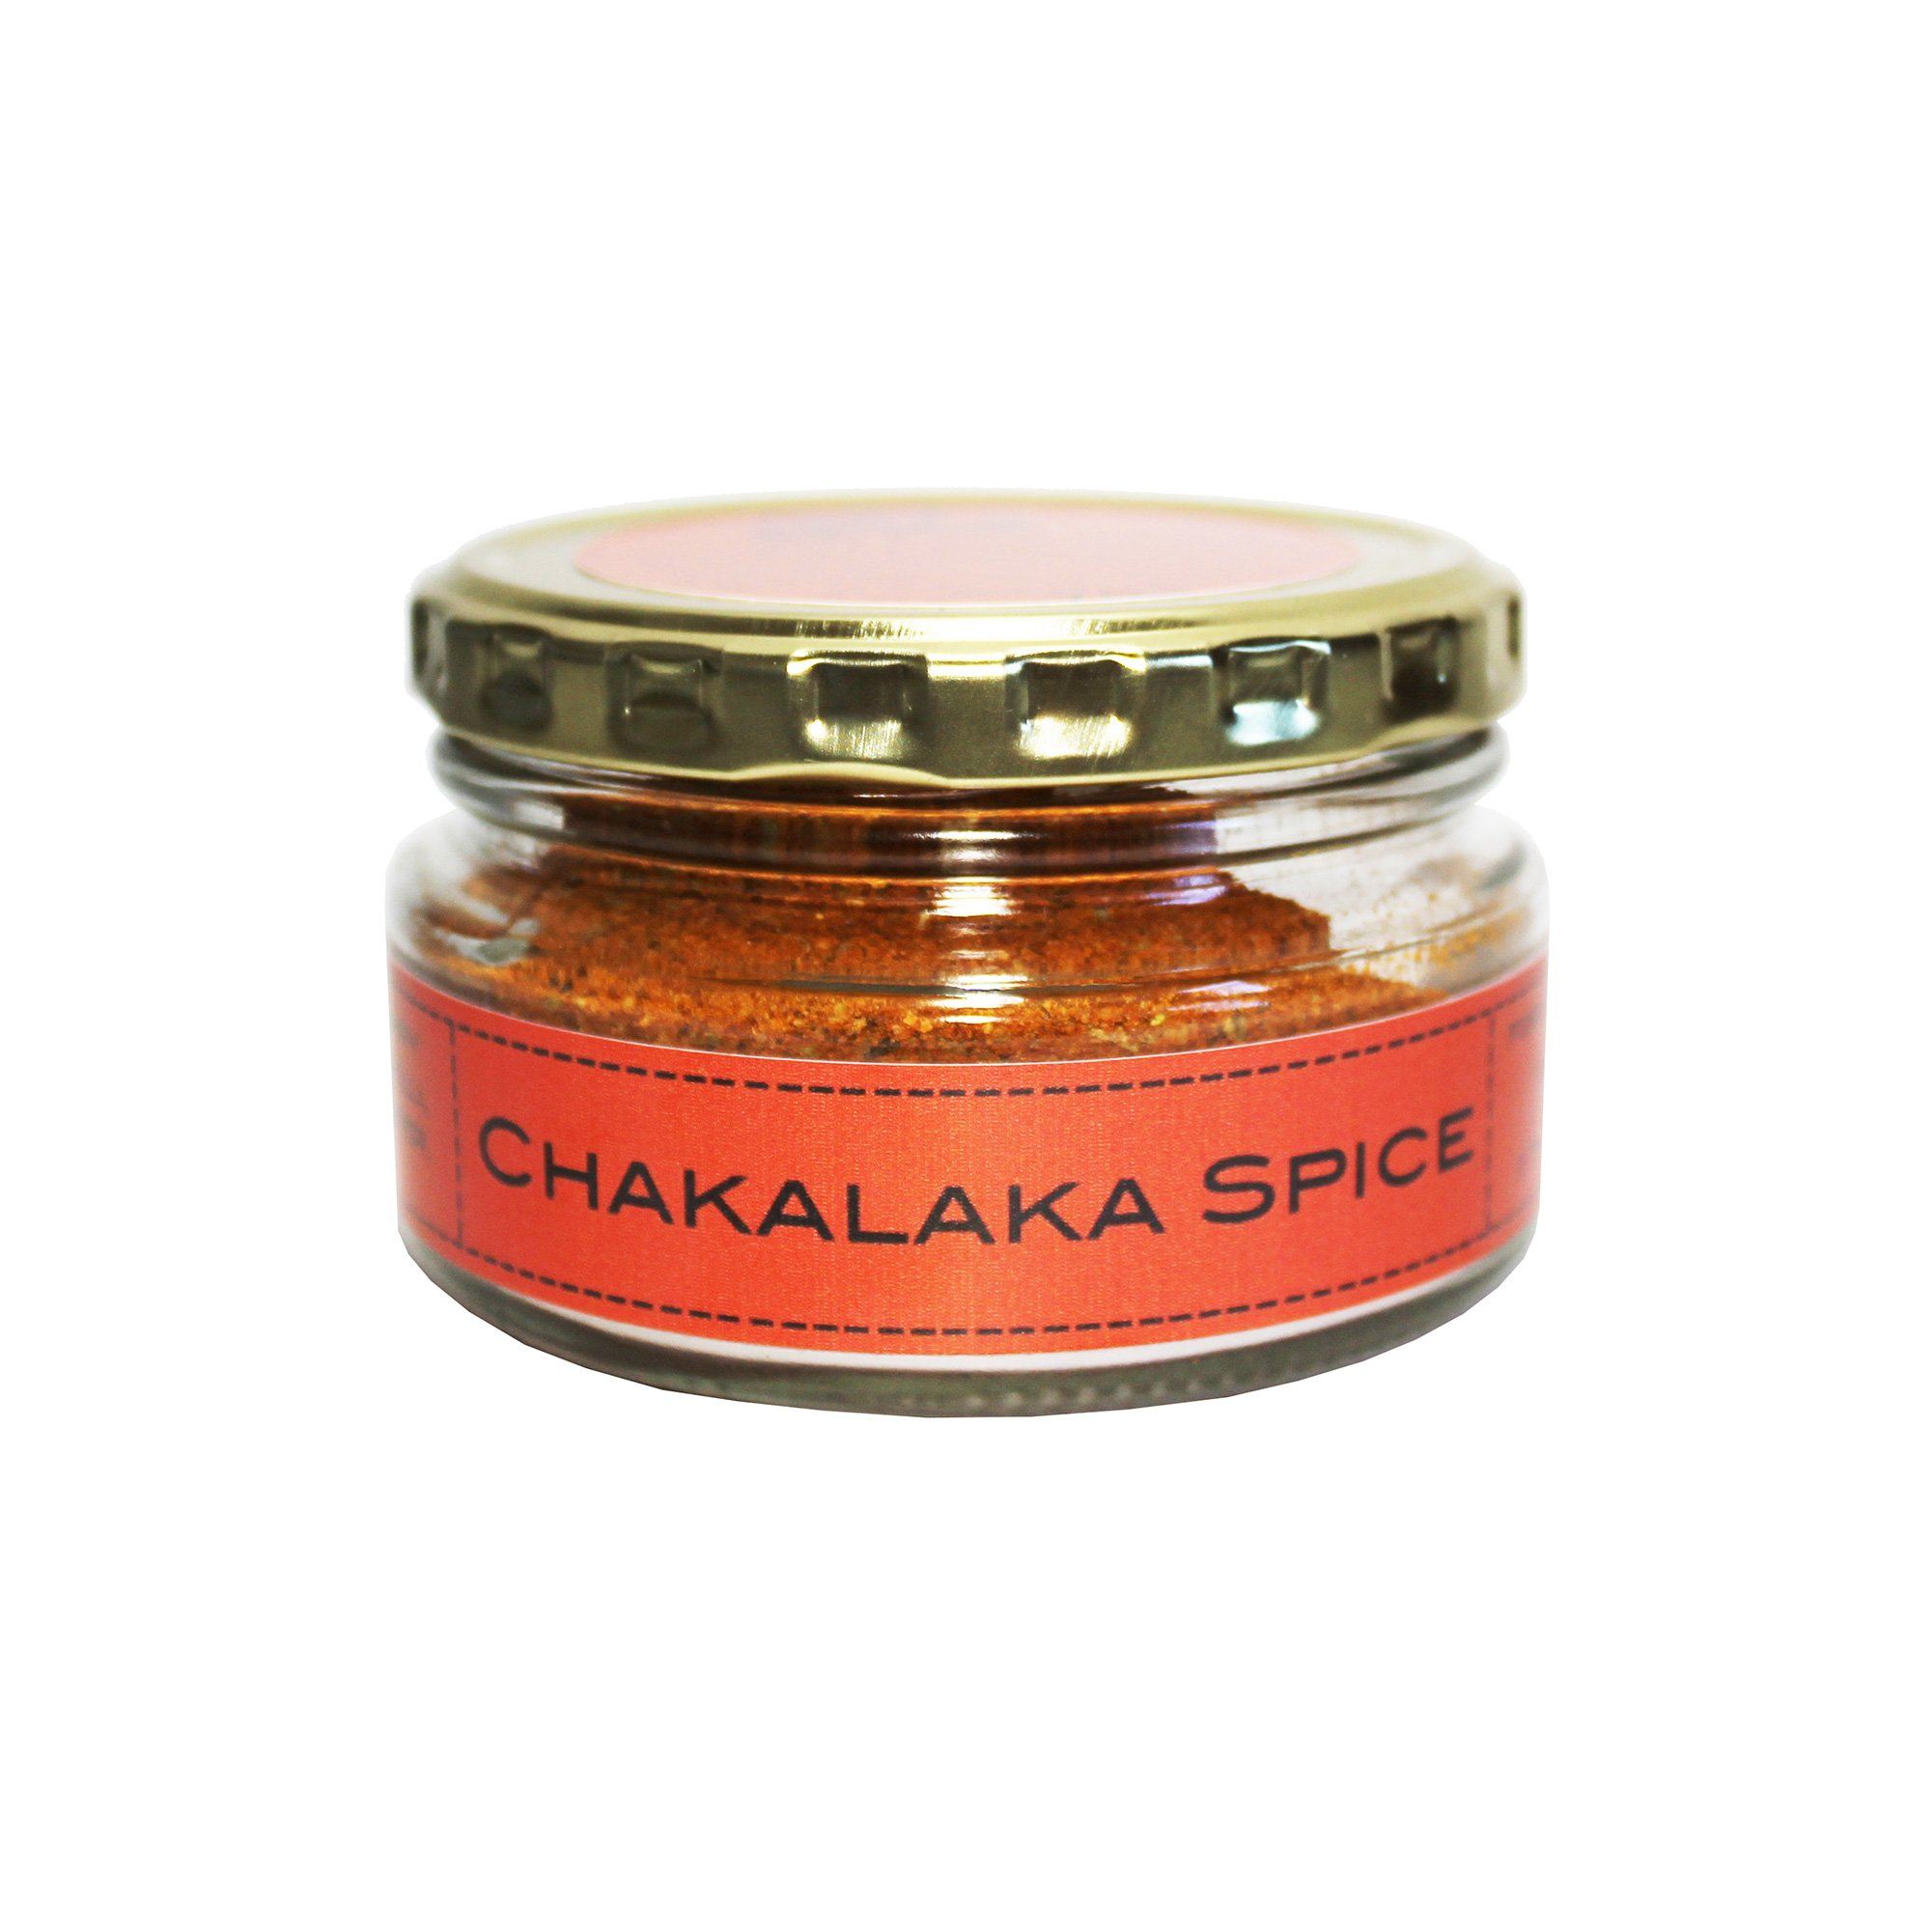 Get Spice Chakalaka Spice 70g Salts, Herbs & Spices Get Spice 